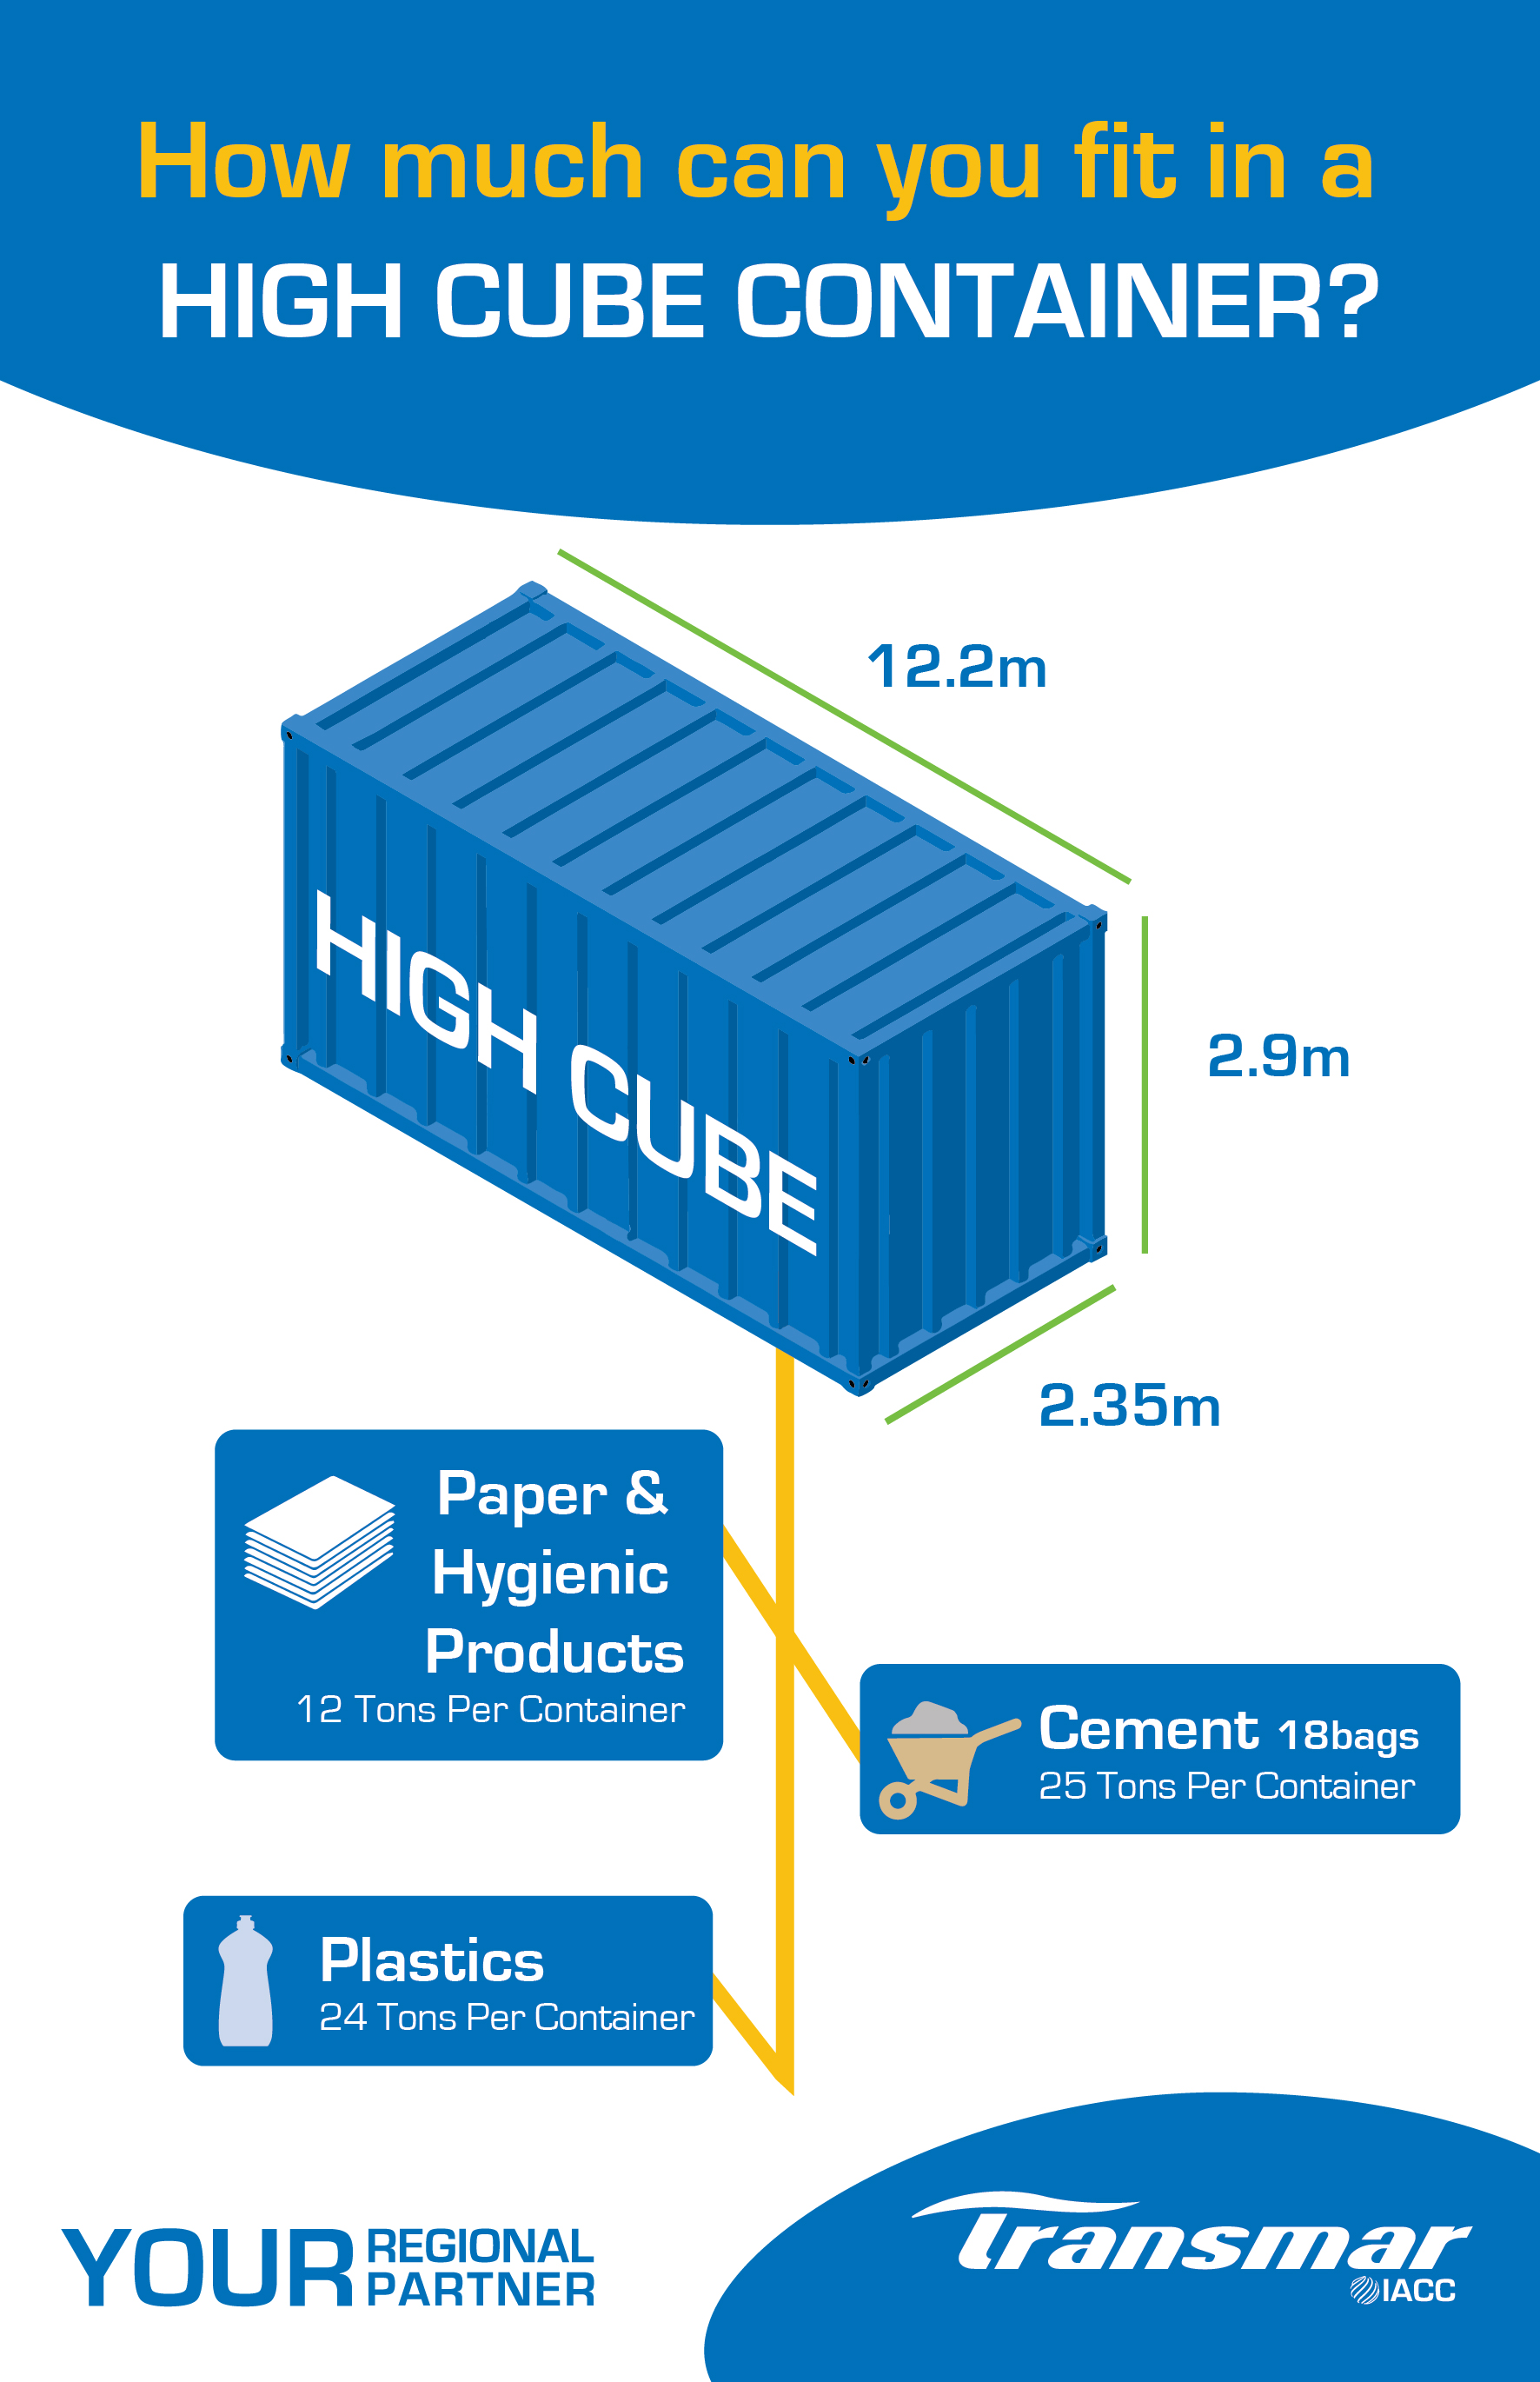 How much can you fit in a high cube container?